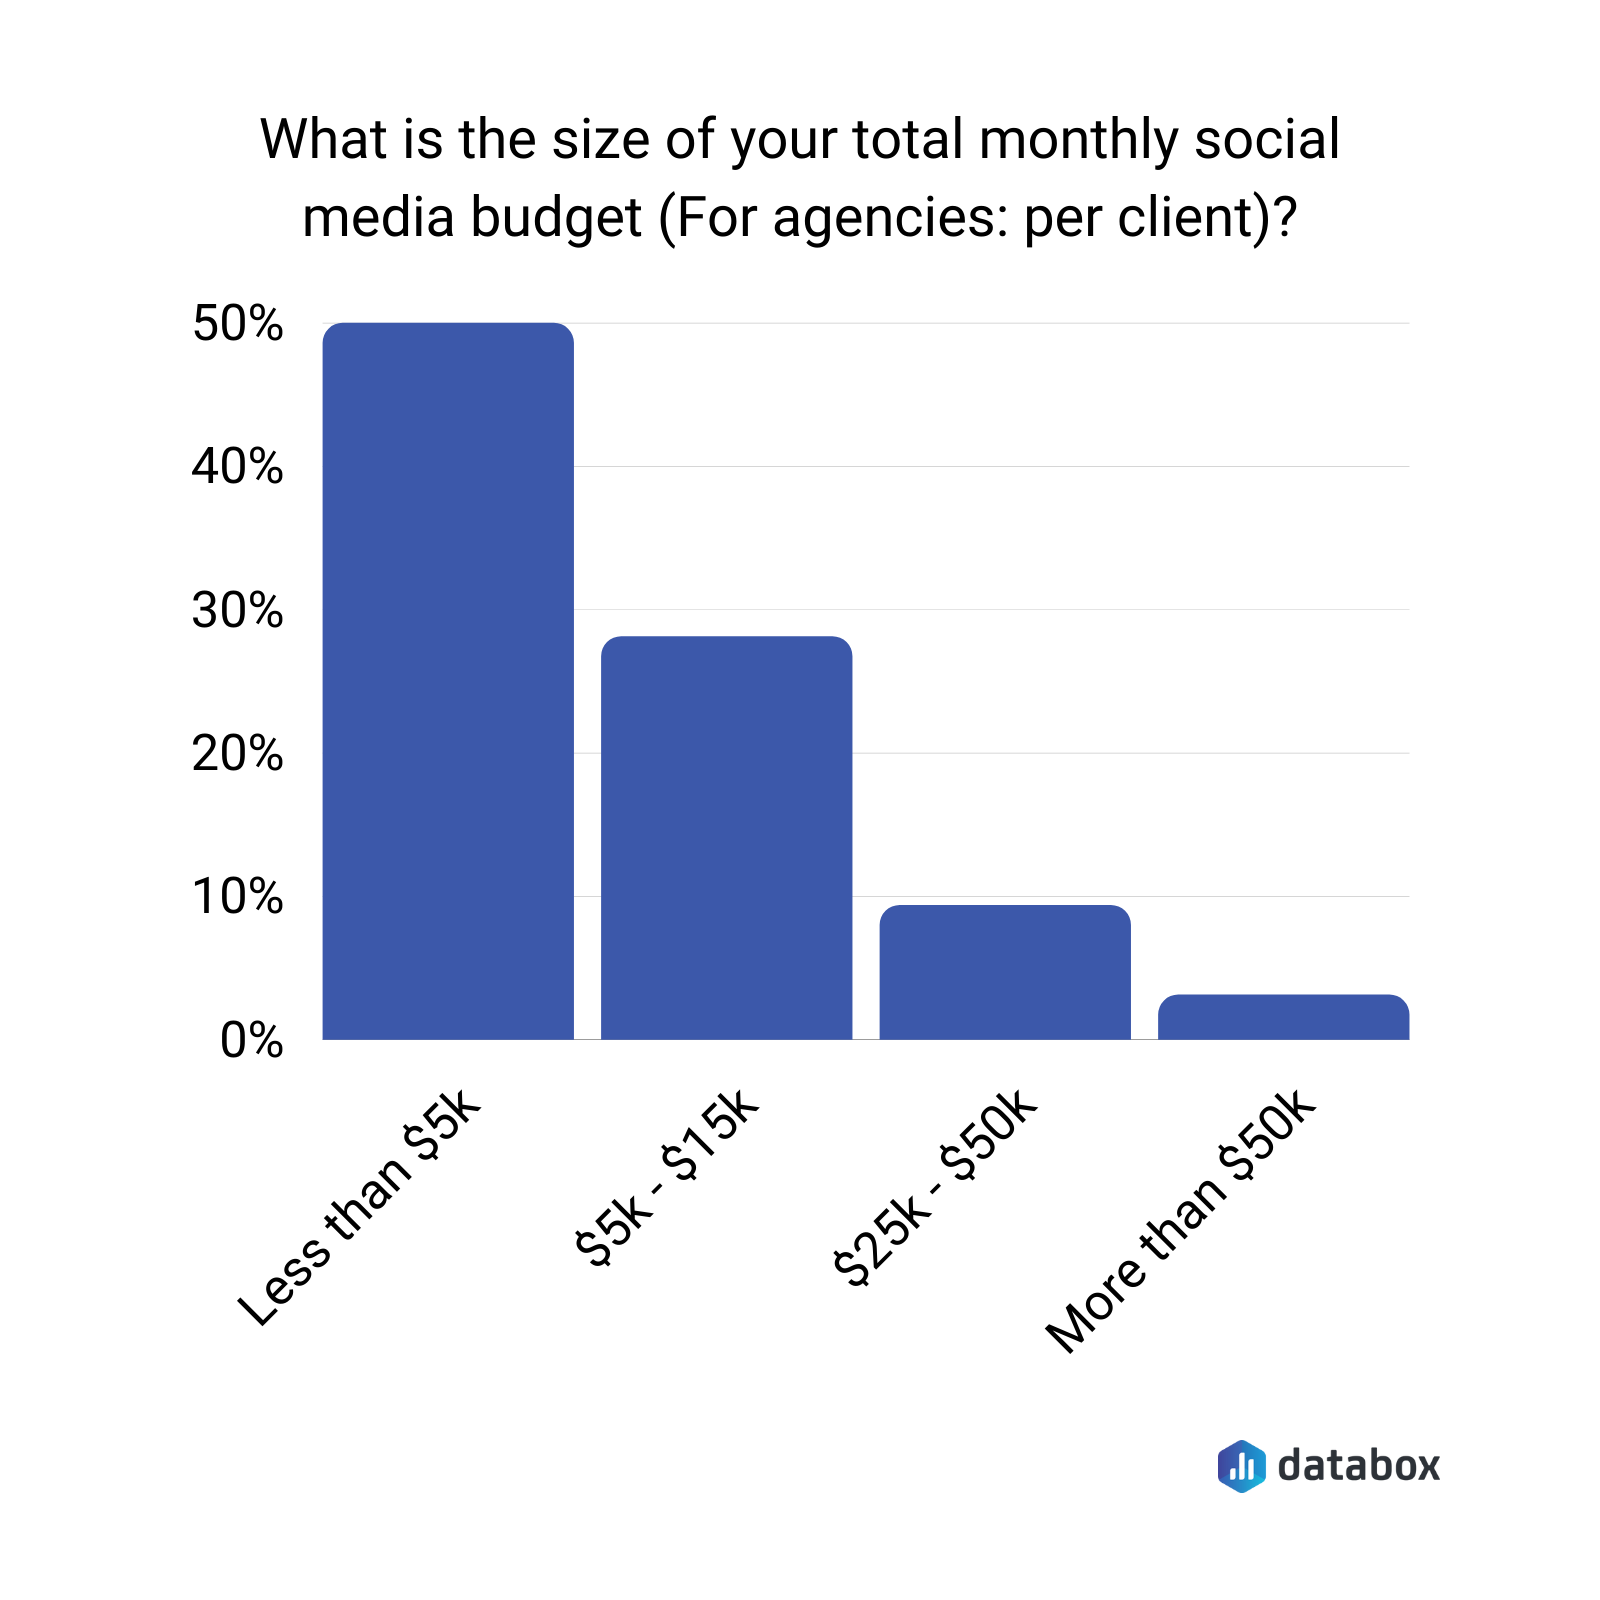 what is the size of your total monthly social media budget? 